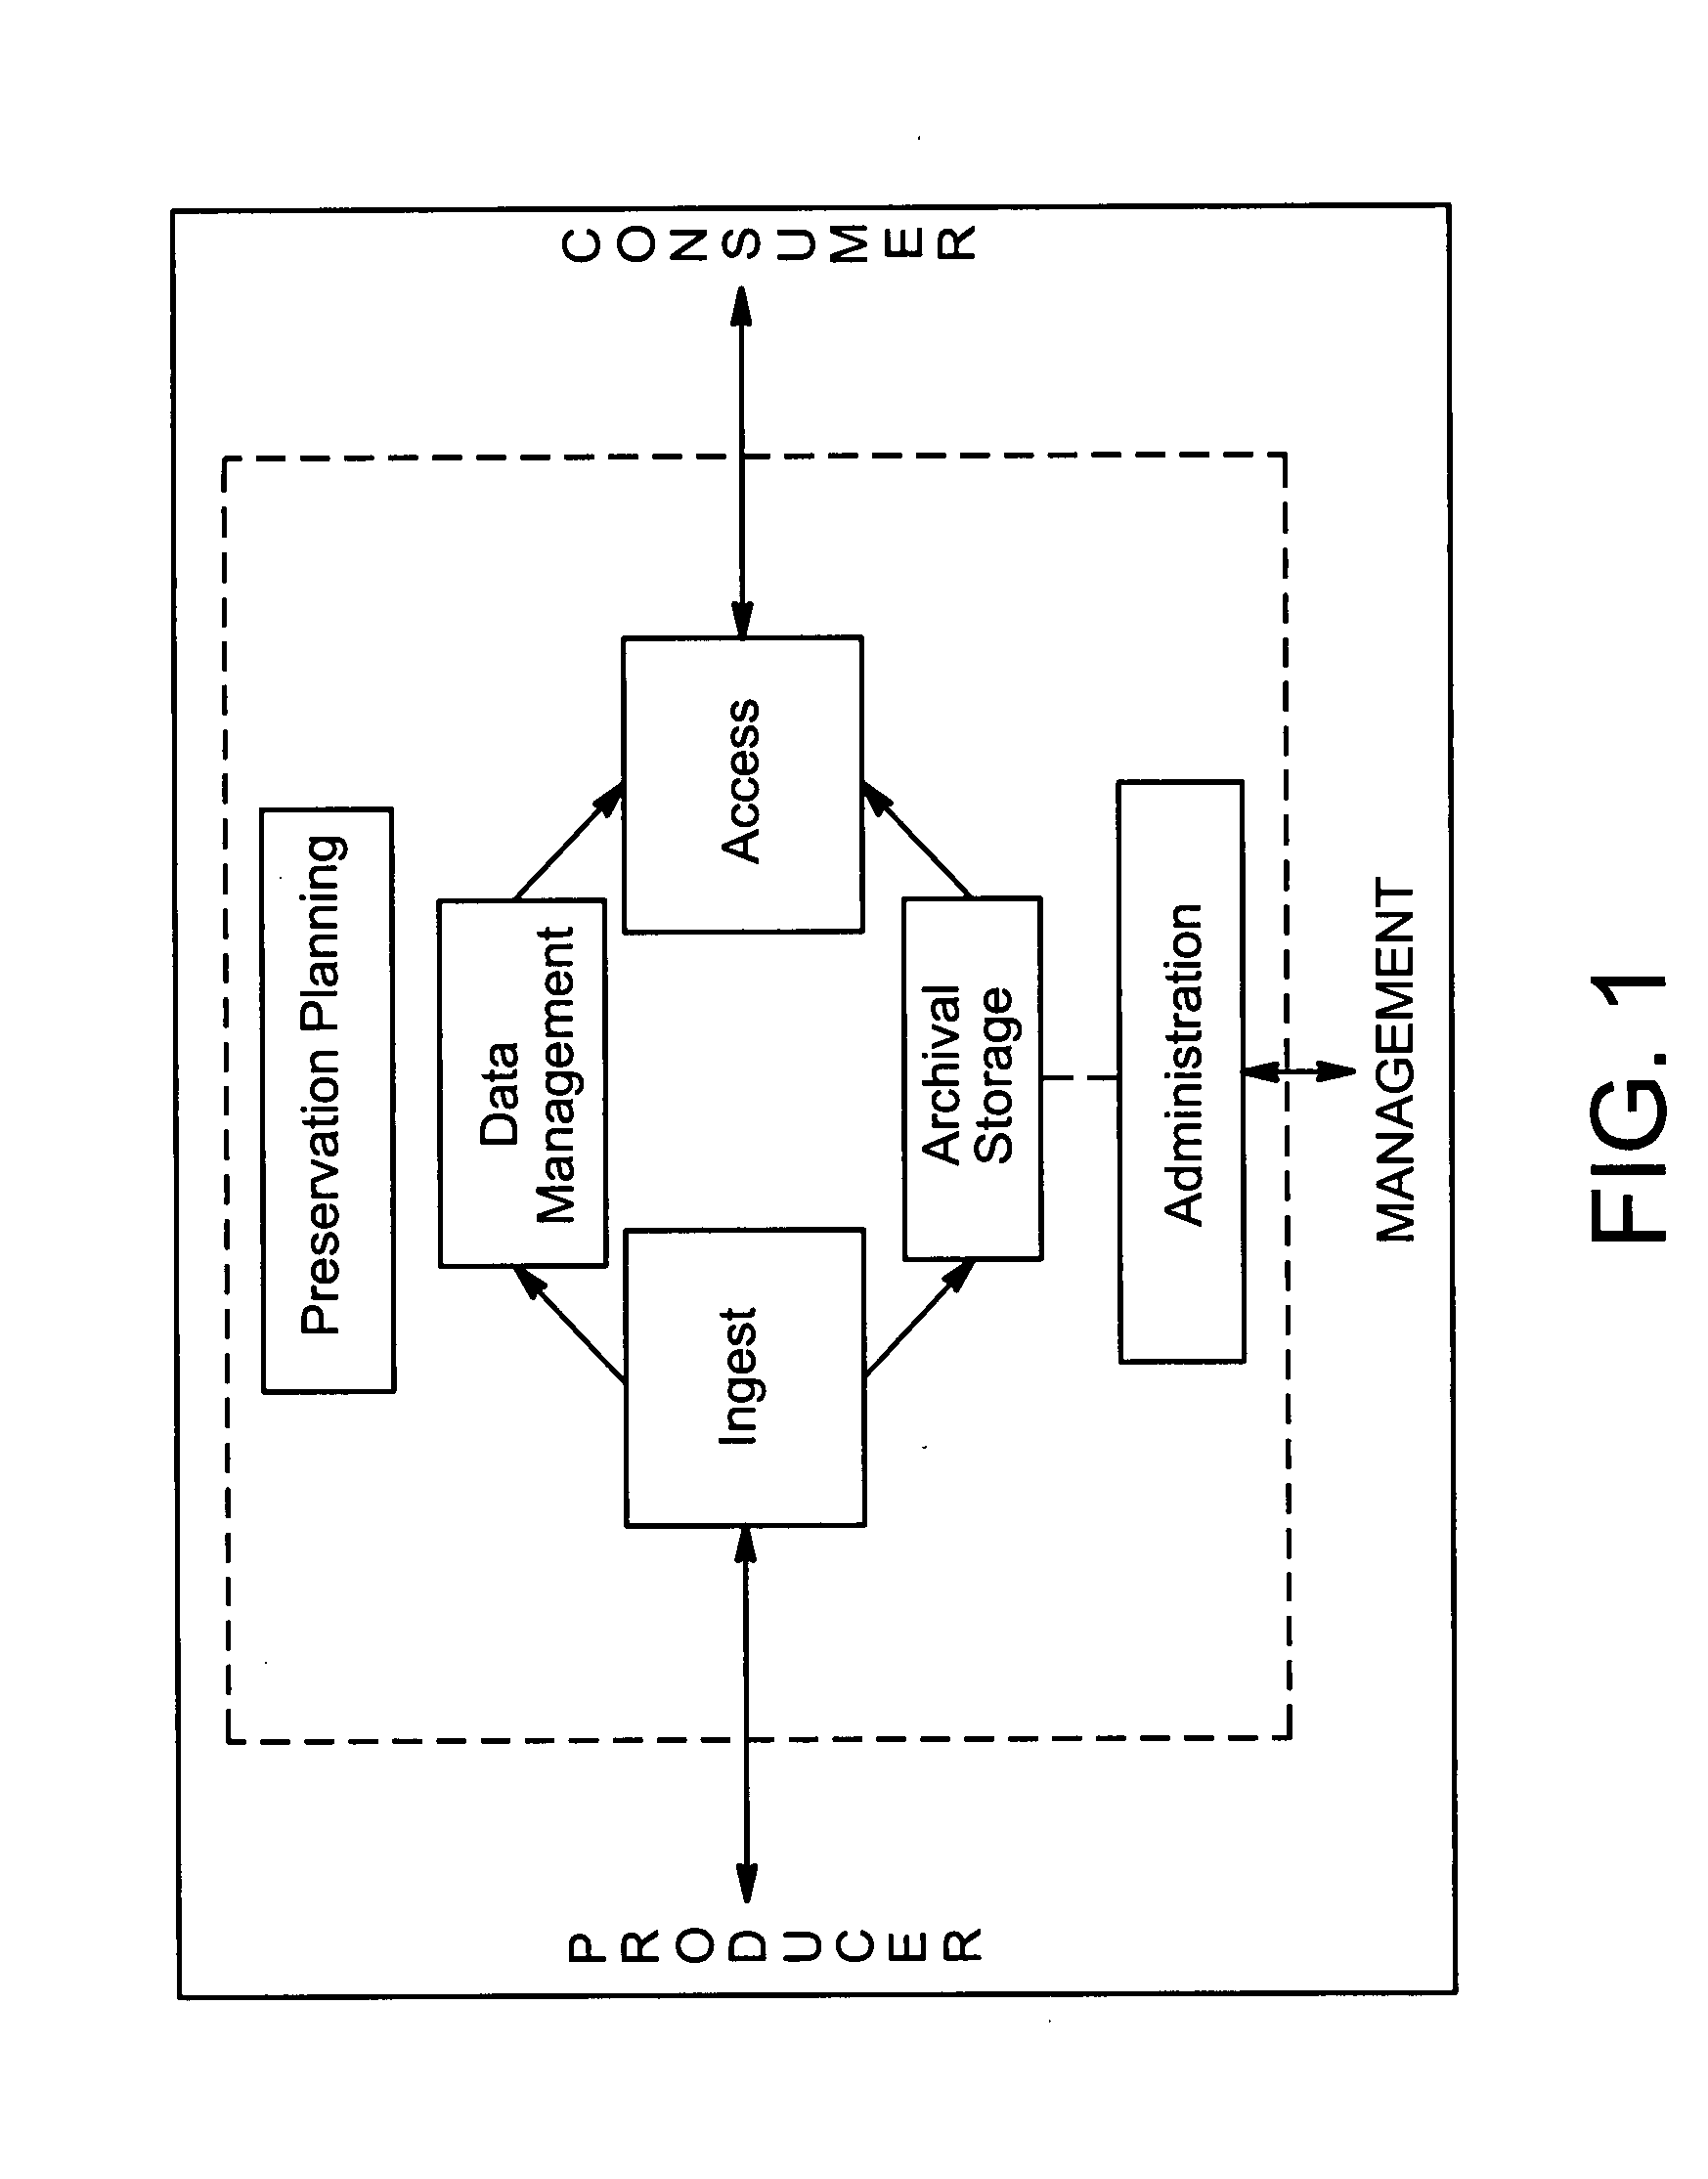 System and method for an immutable identification scheme in a large-scale computer system